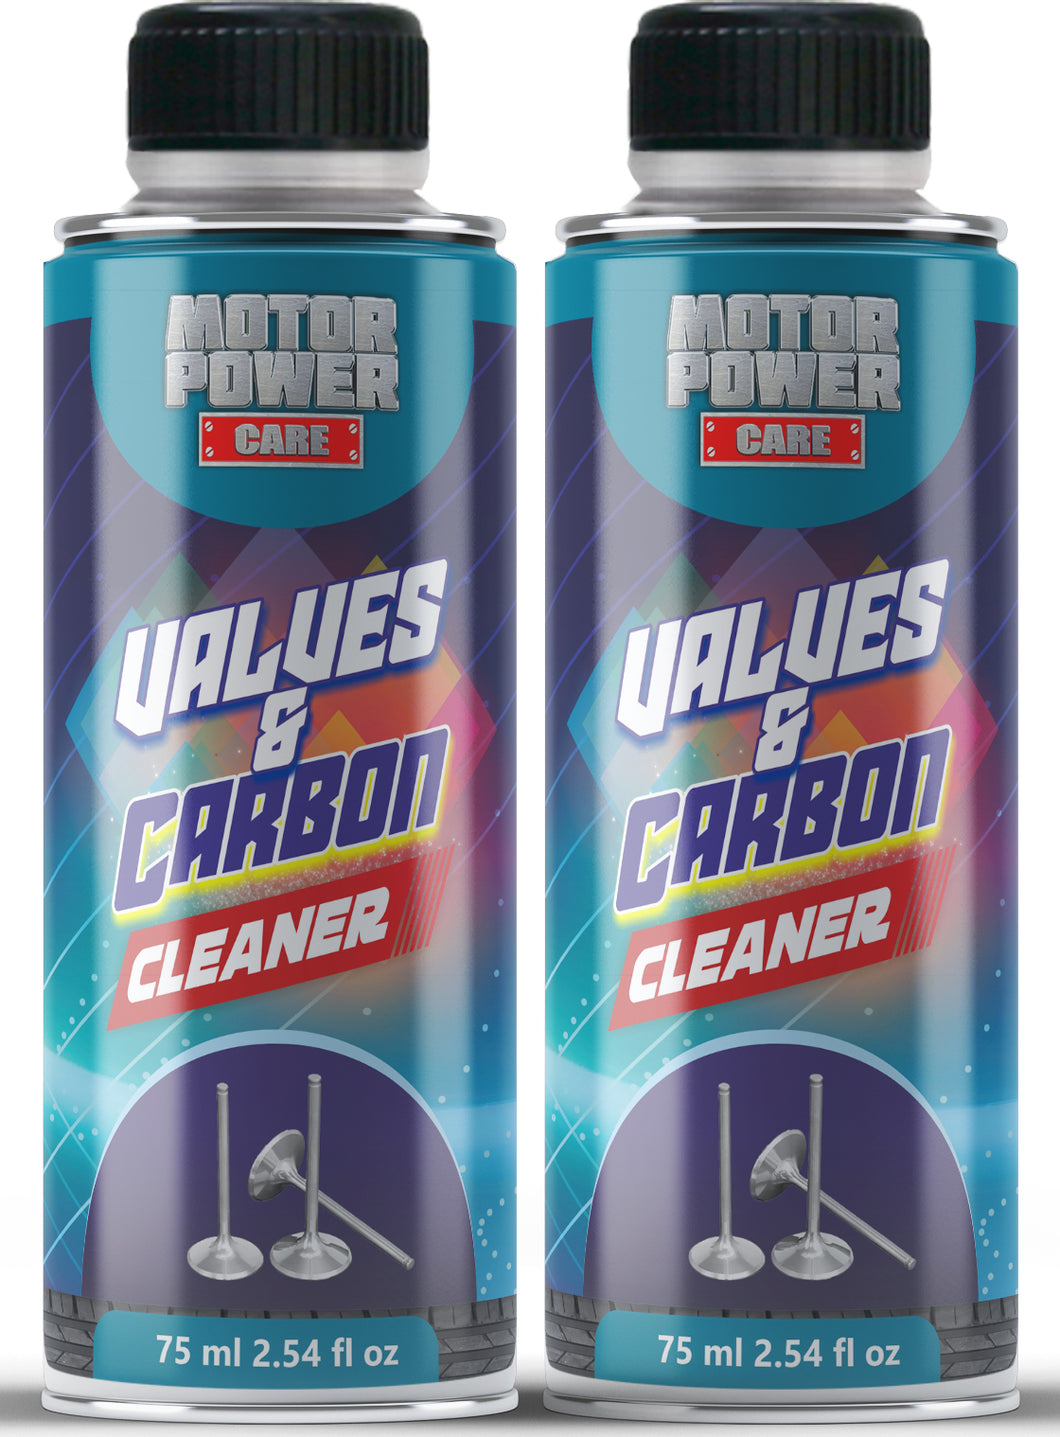 Valves & Carbon Cleaner combustion chamber cleaner fuel additive MotorPower Care